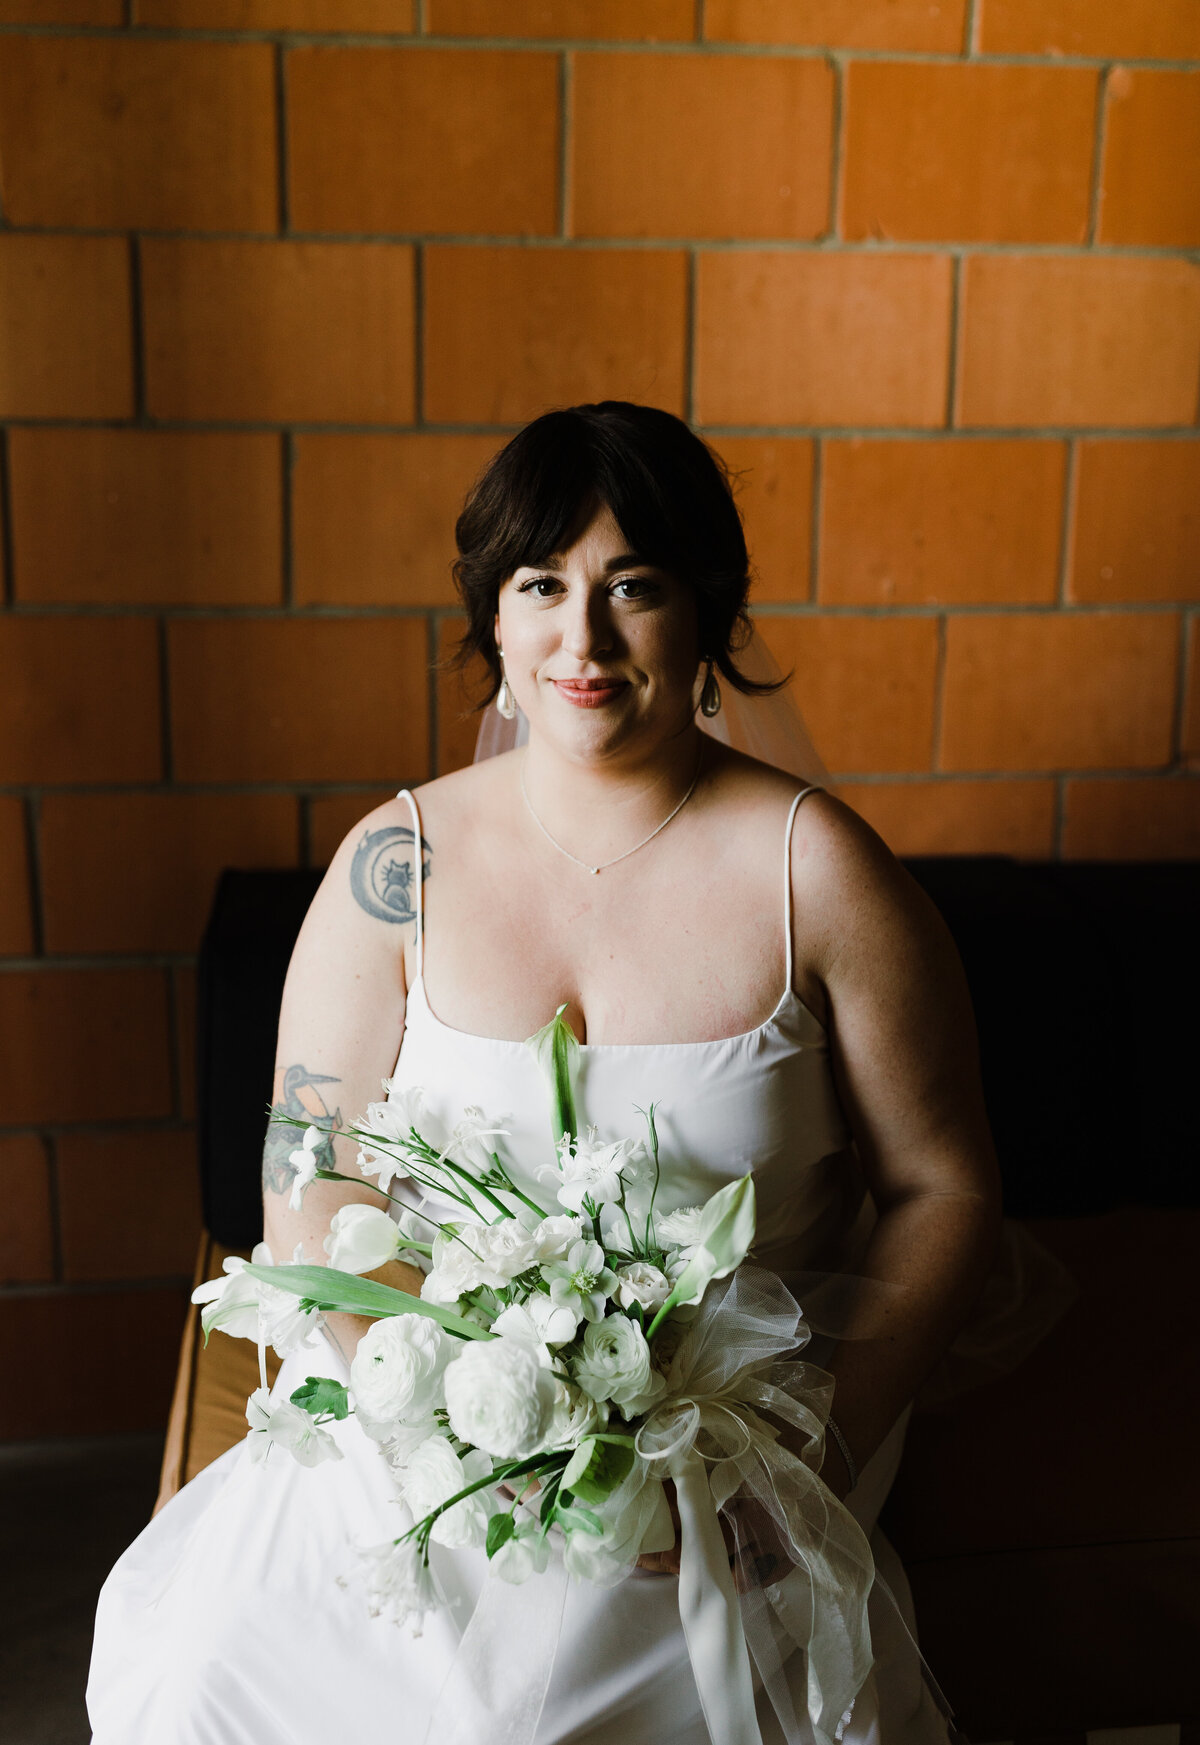 Bride sitting down holding bouquet of white flowers